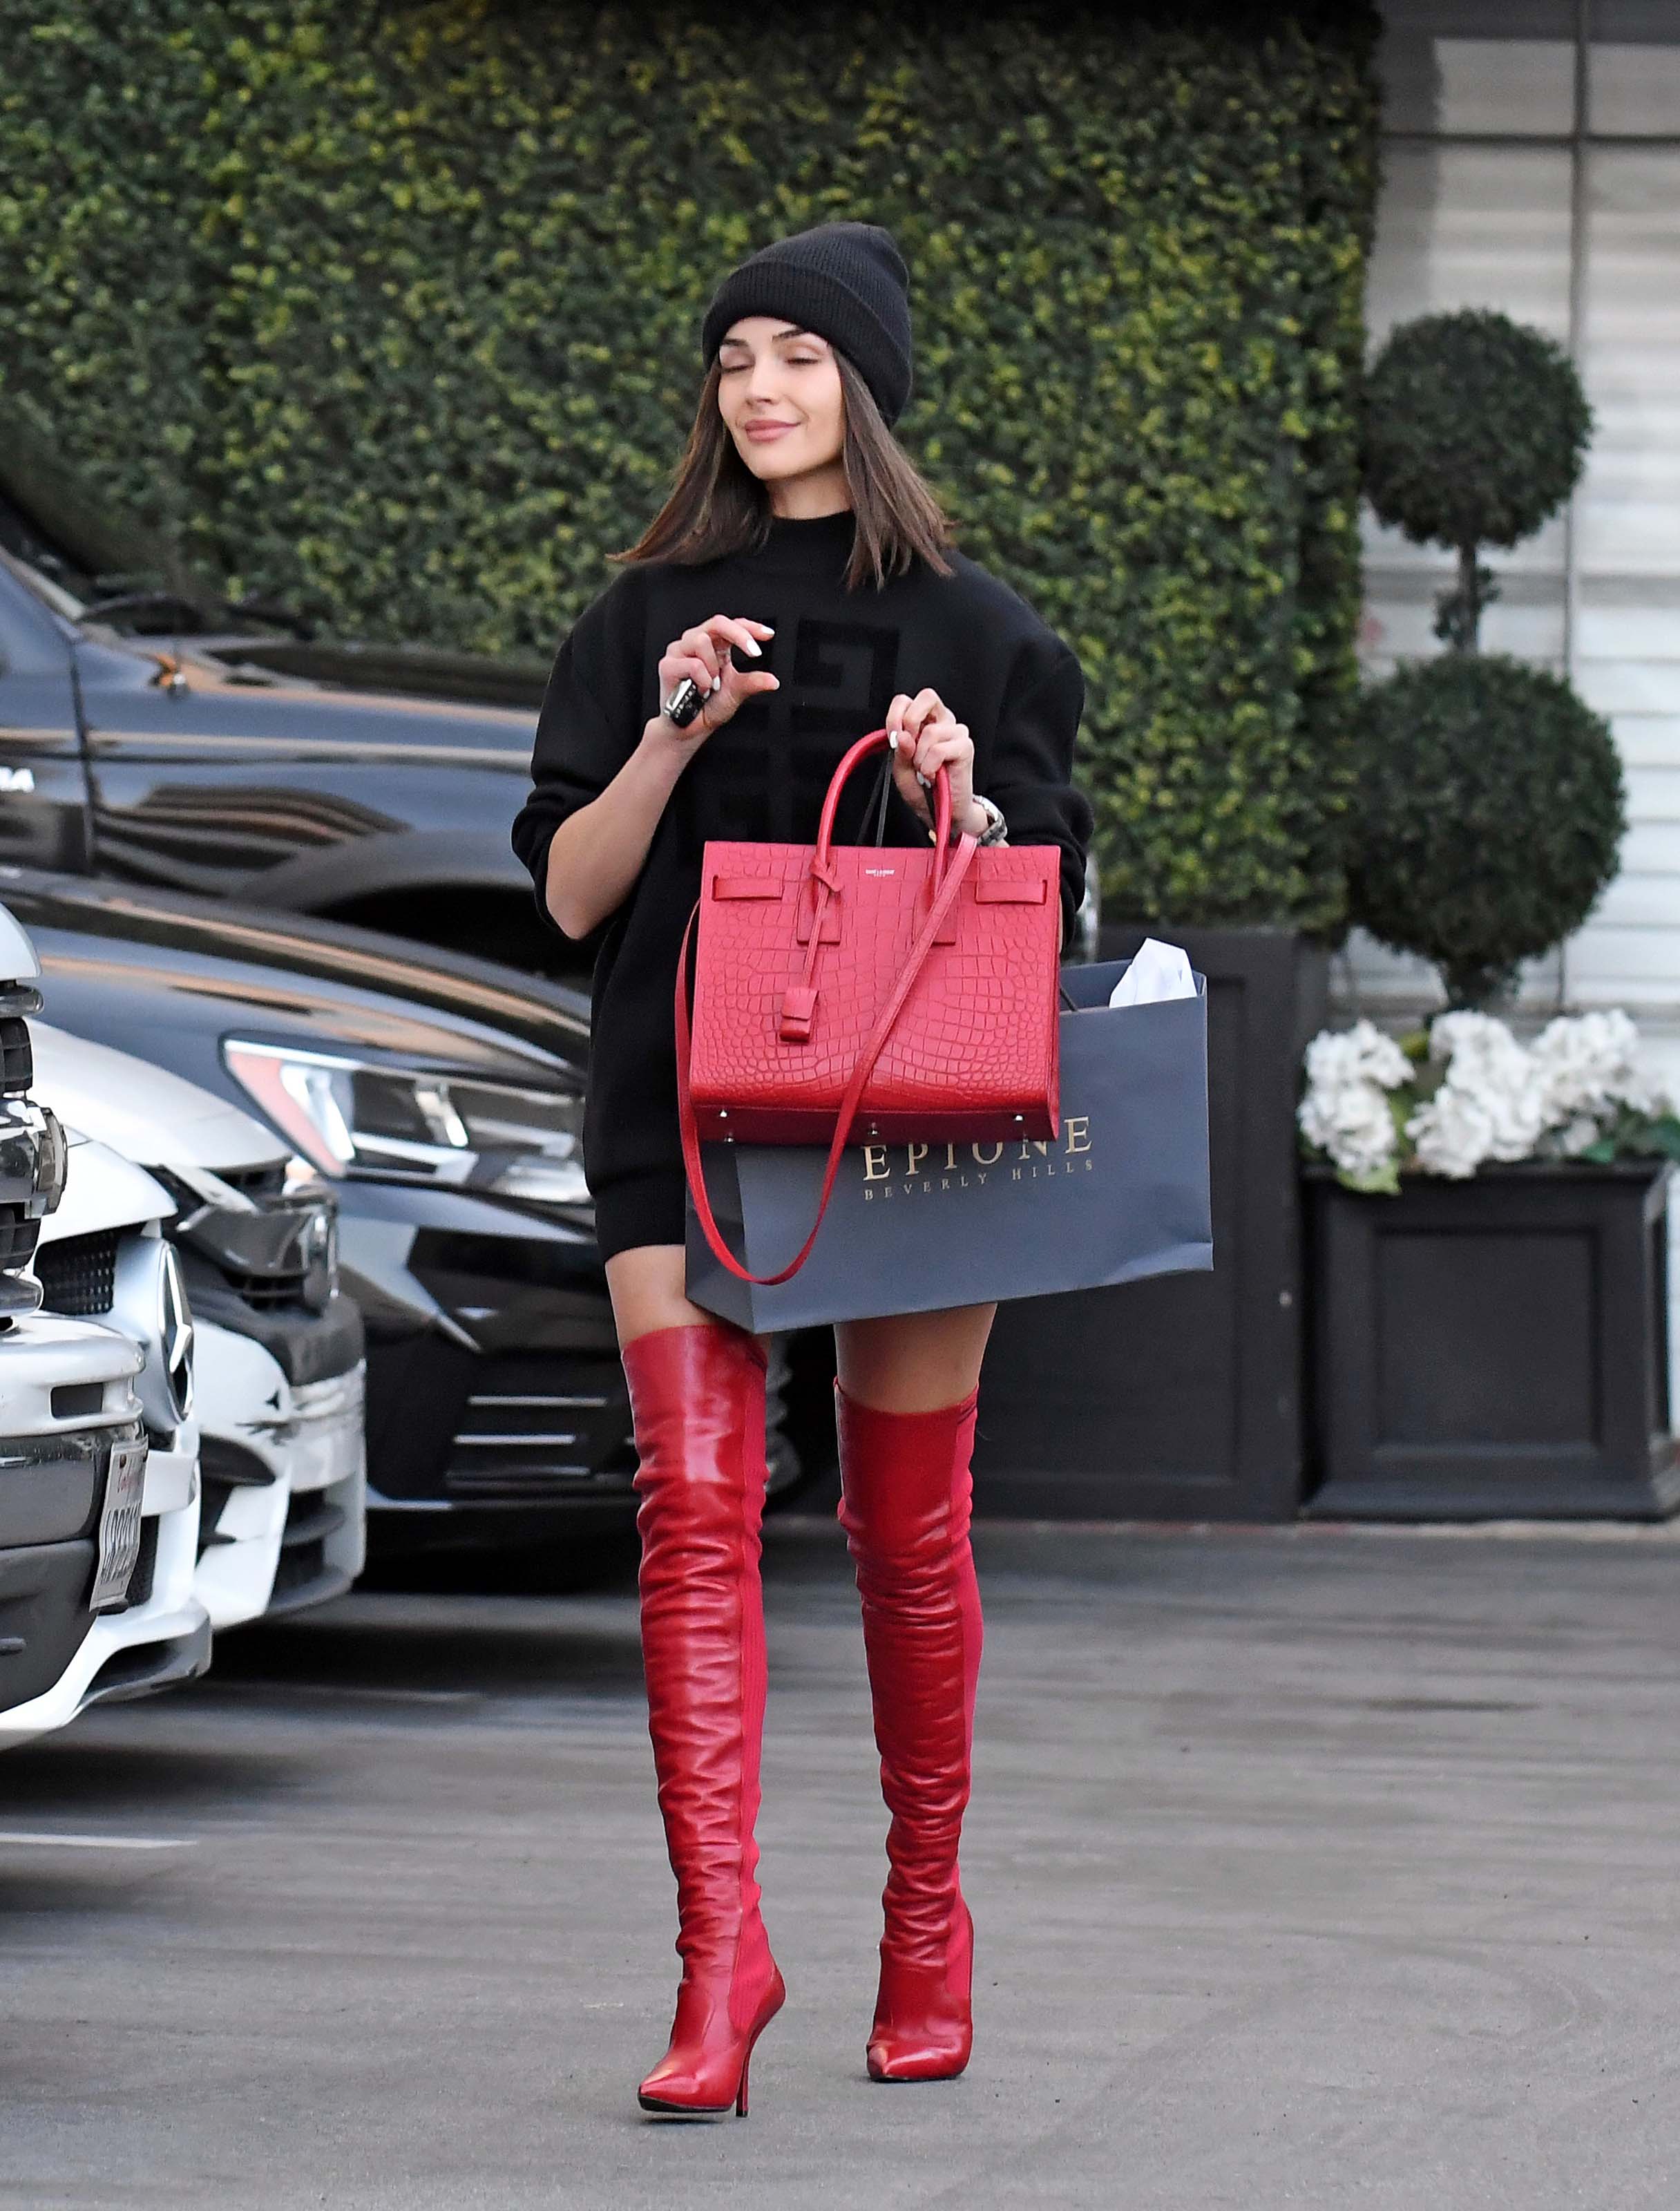 Olivia Culpo at Epione in Beverly Hills